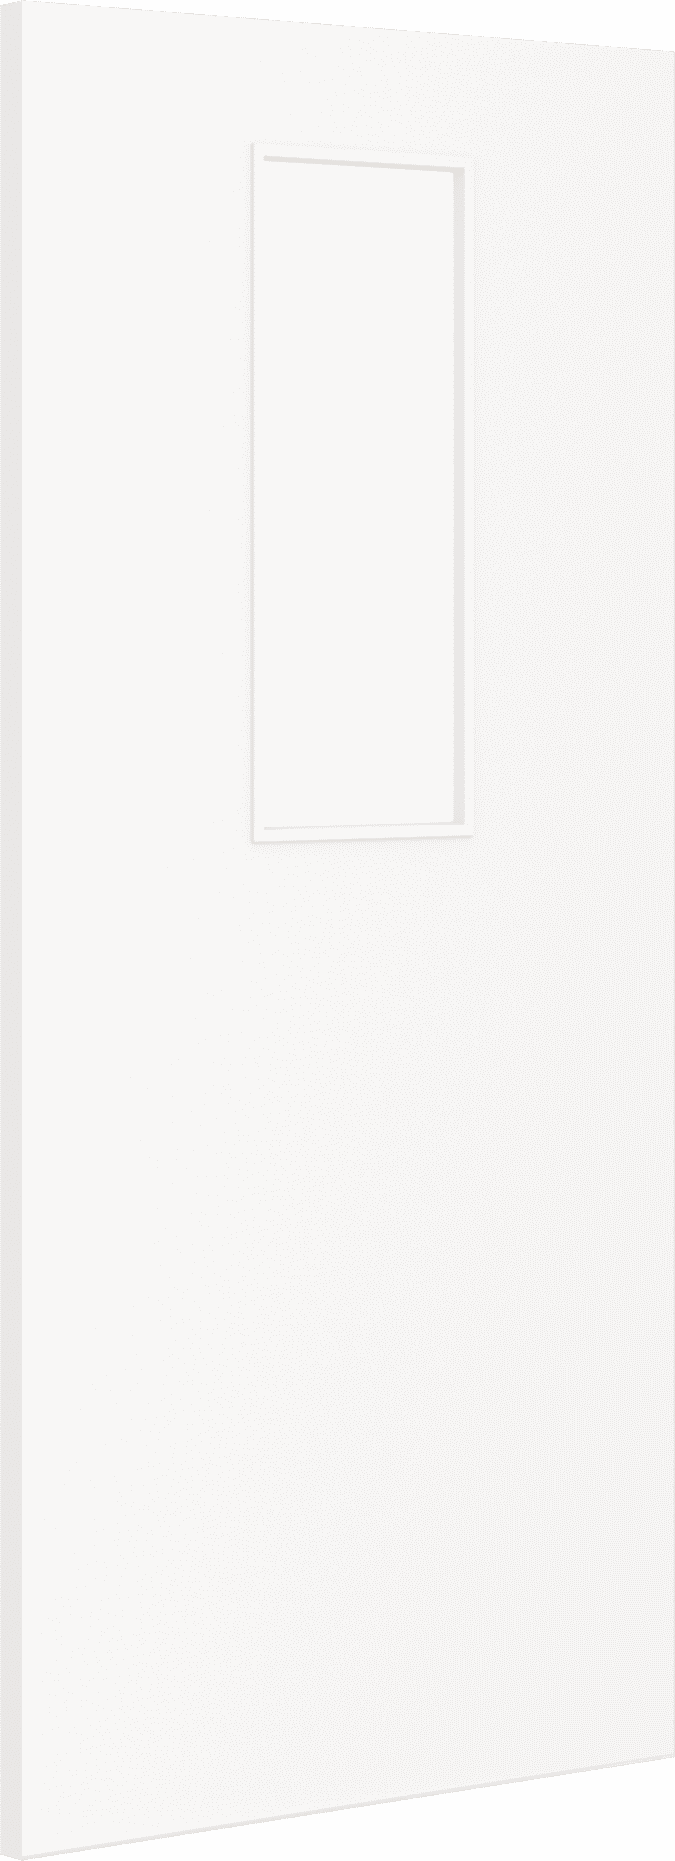 1981mm x 838mm x 44mm (33") Architectural Paint Grade White 14 Frosted Glazed Fire Door Blank